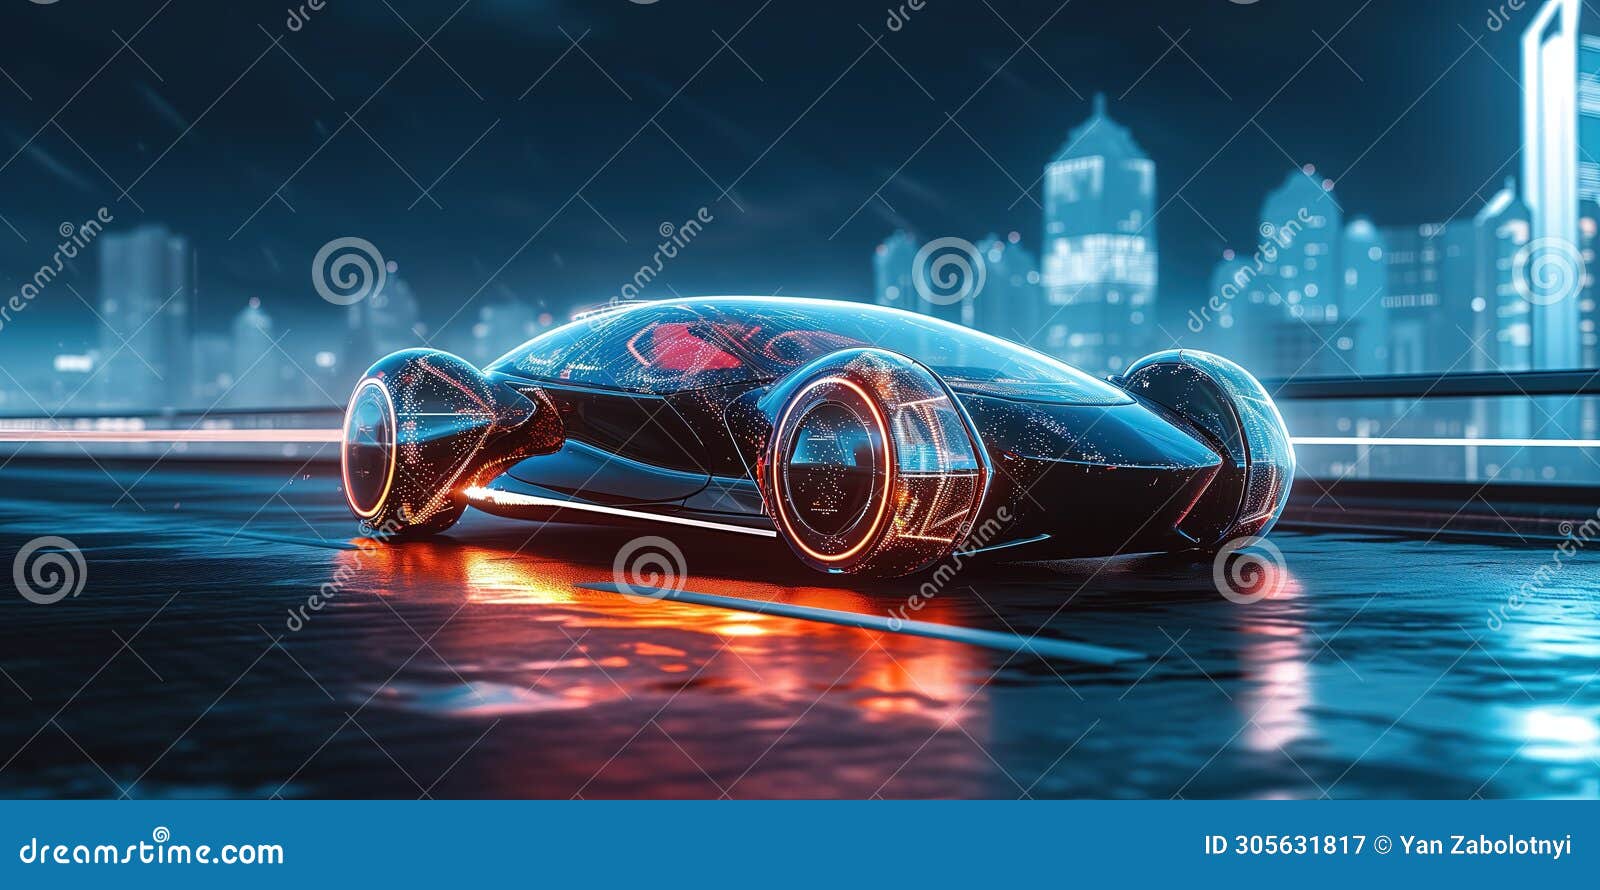 a dazzling futuristic car shimmering with an ethereal ghostlike aura